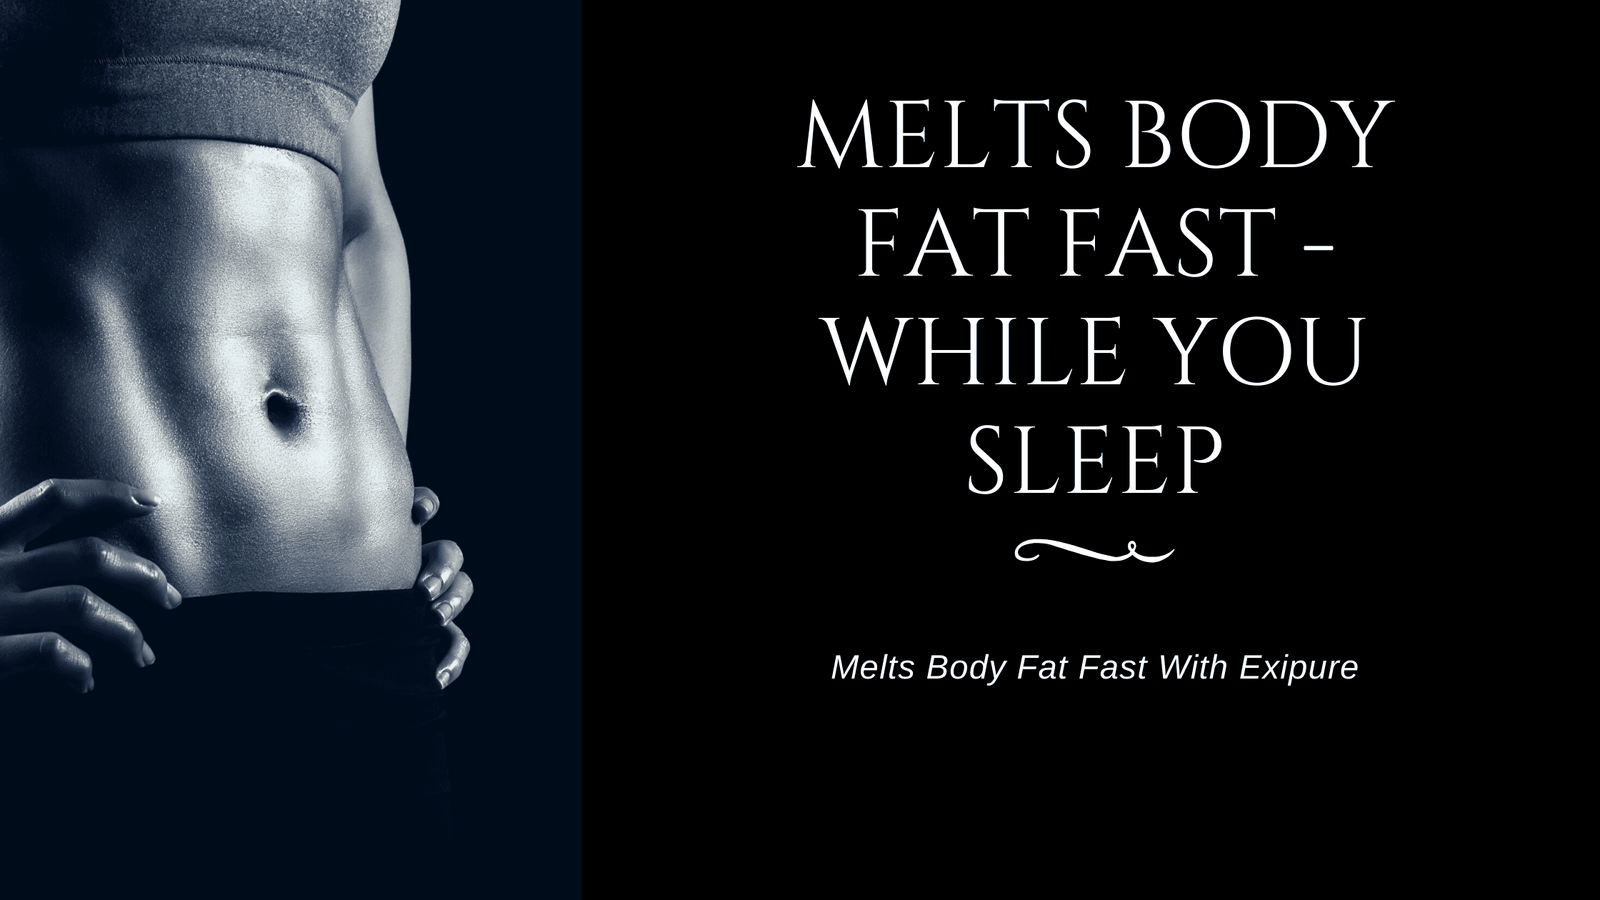 Melts Body Fat Fast - While You Sleep